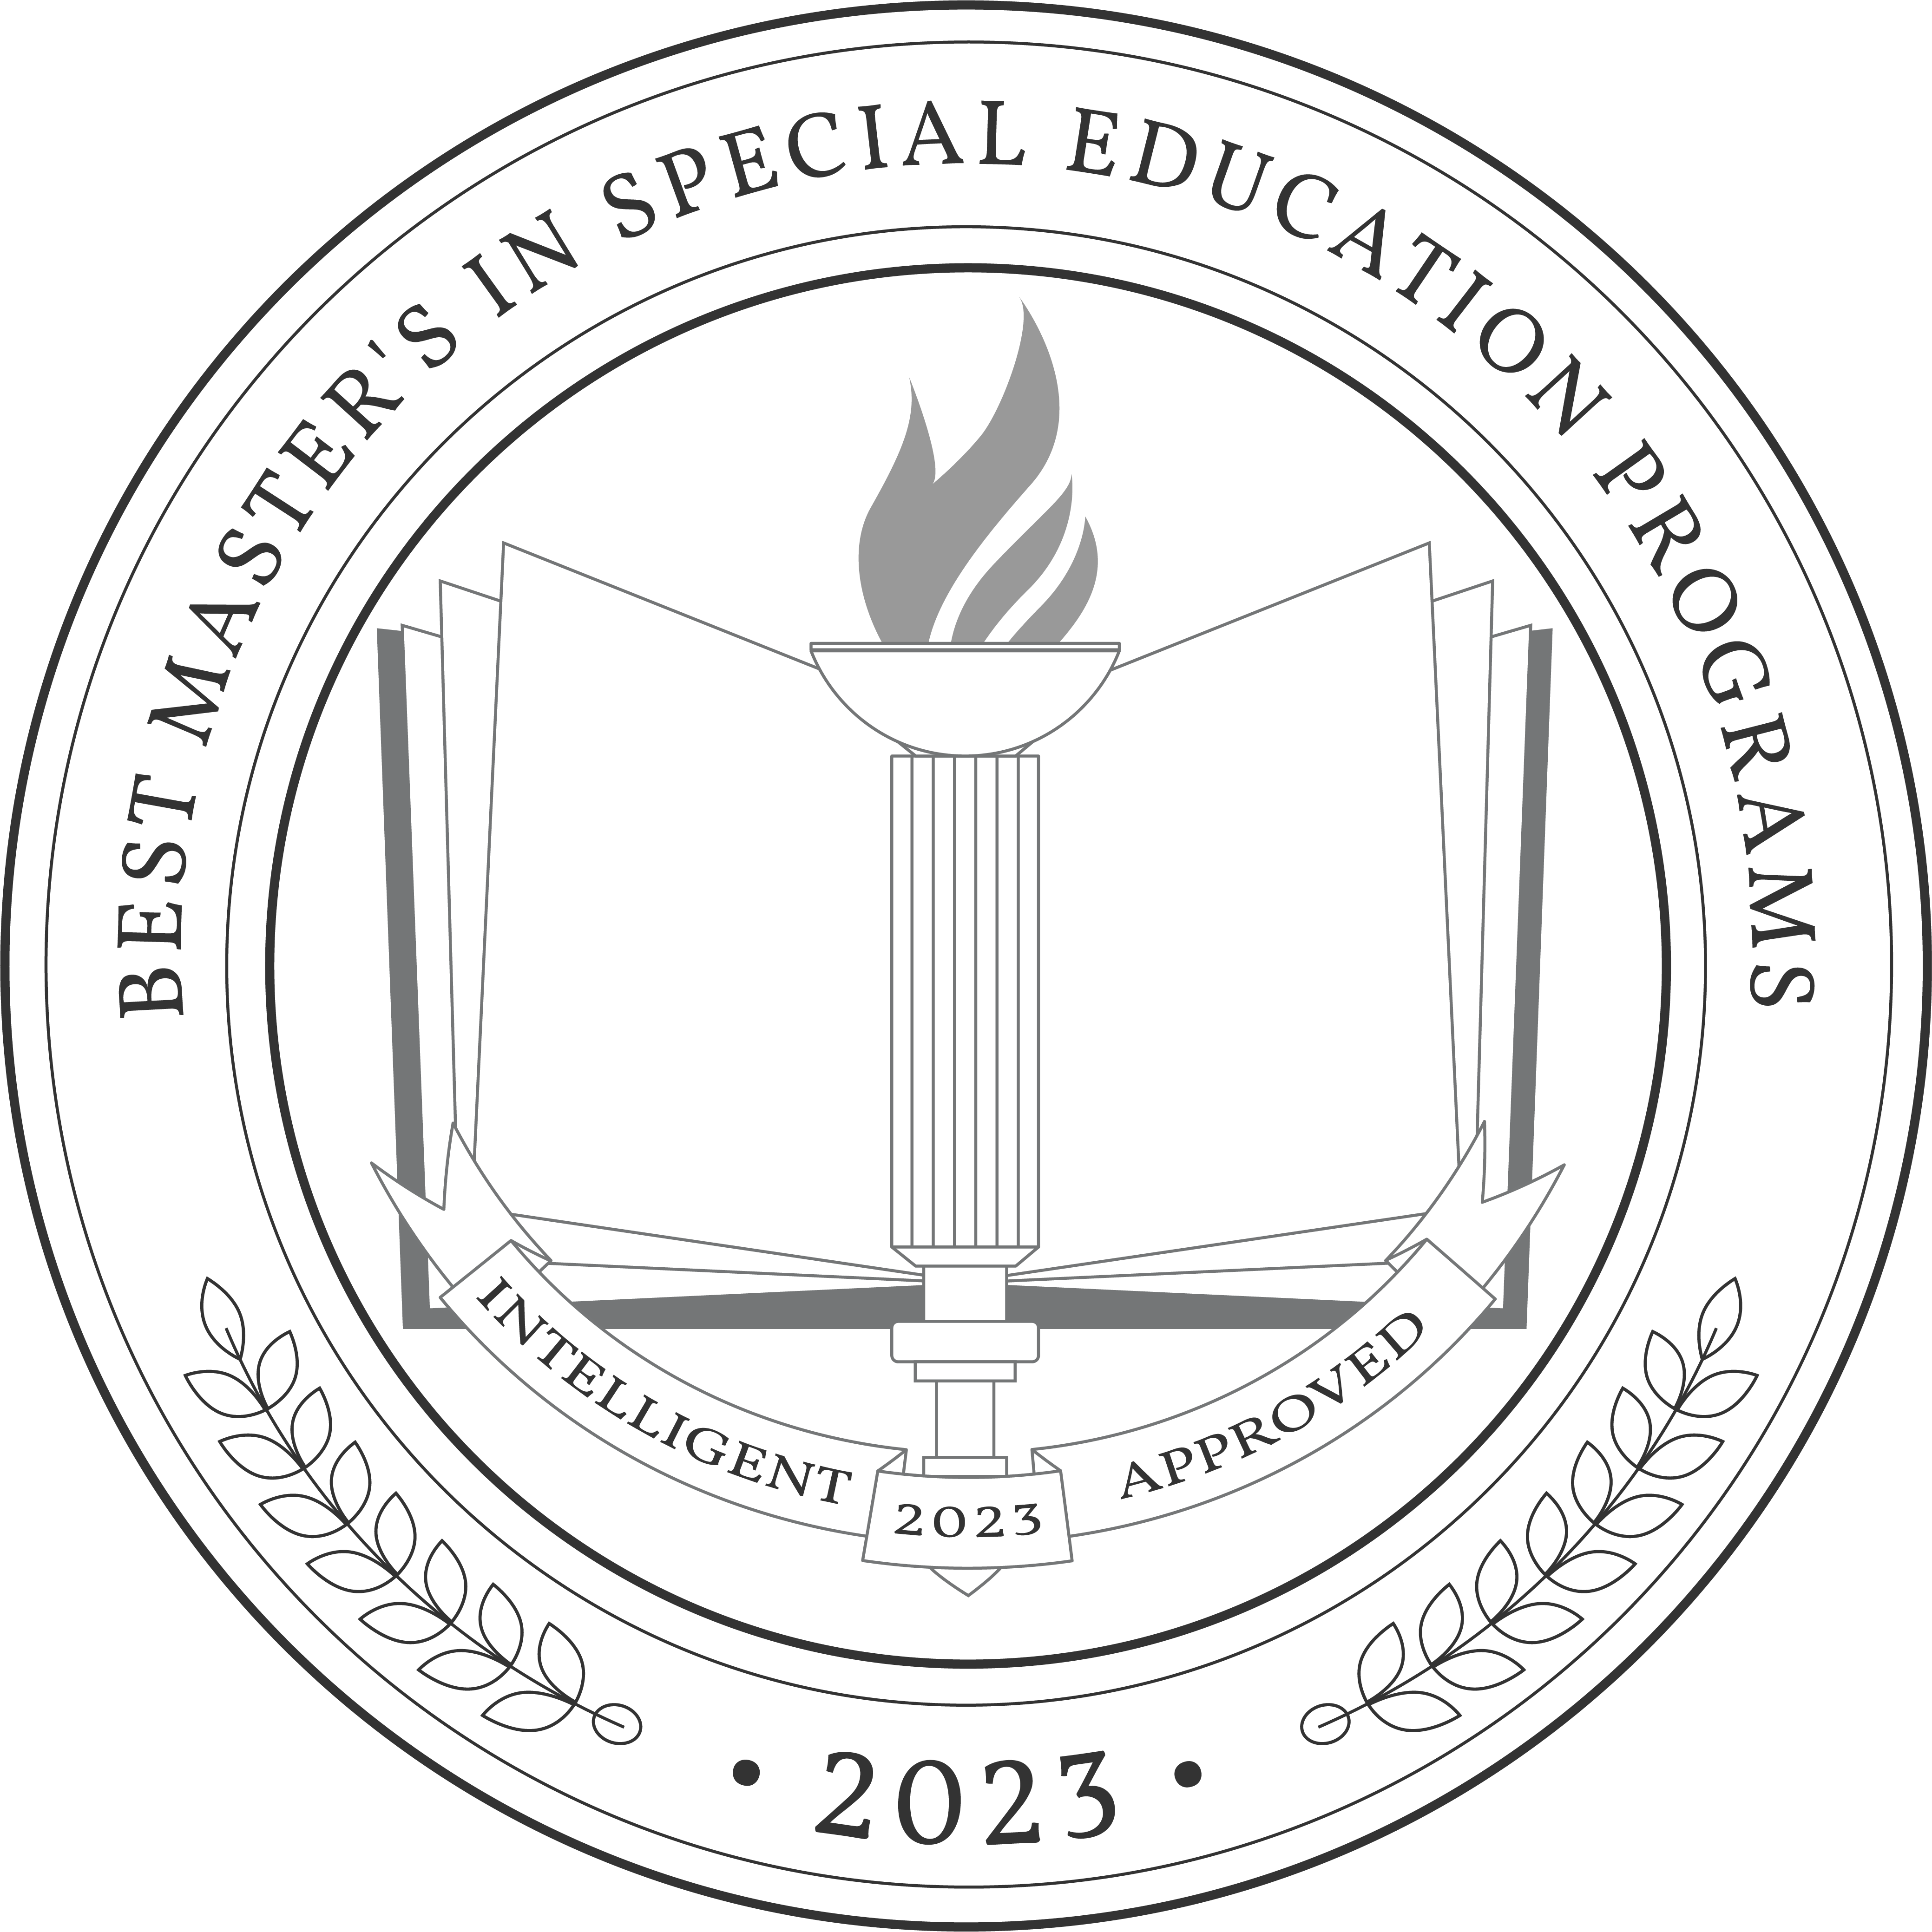 Best Master's in Special Education Programs 2023